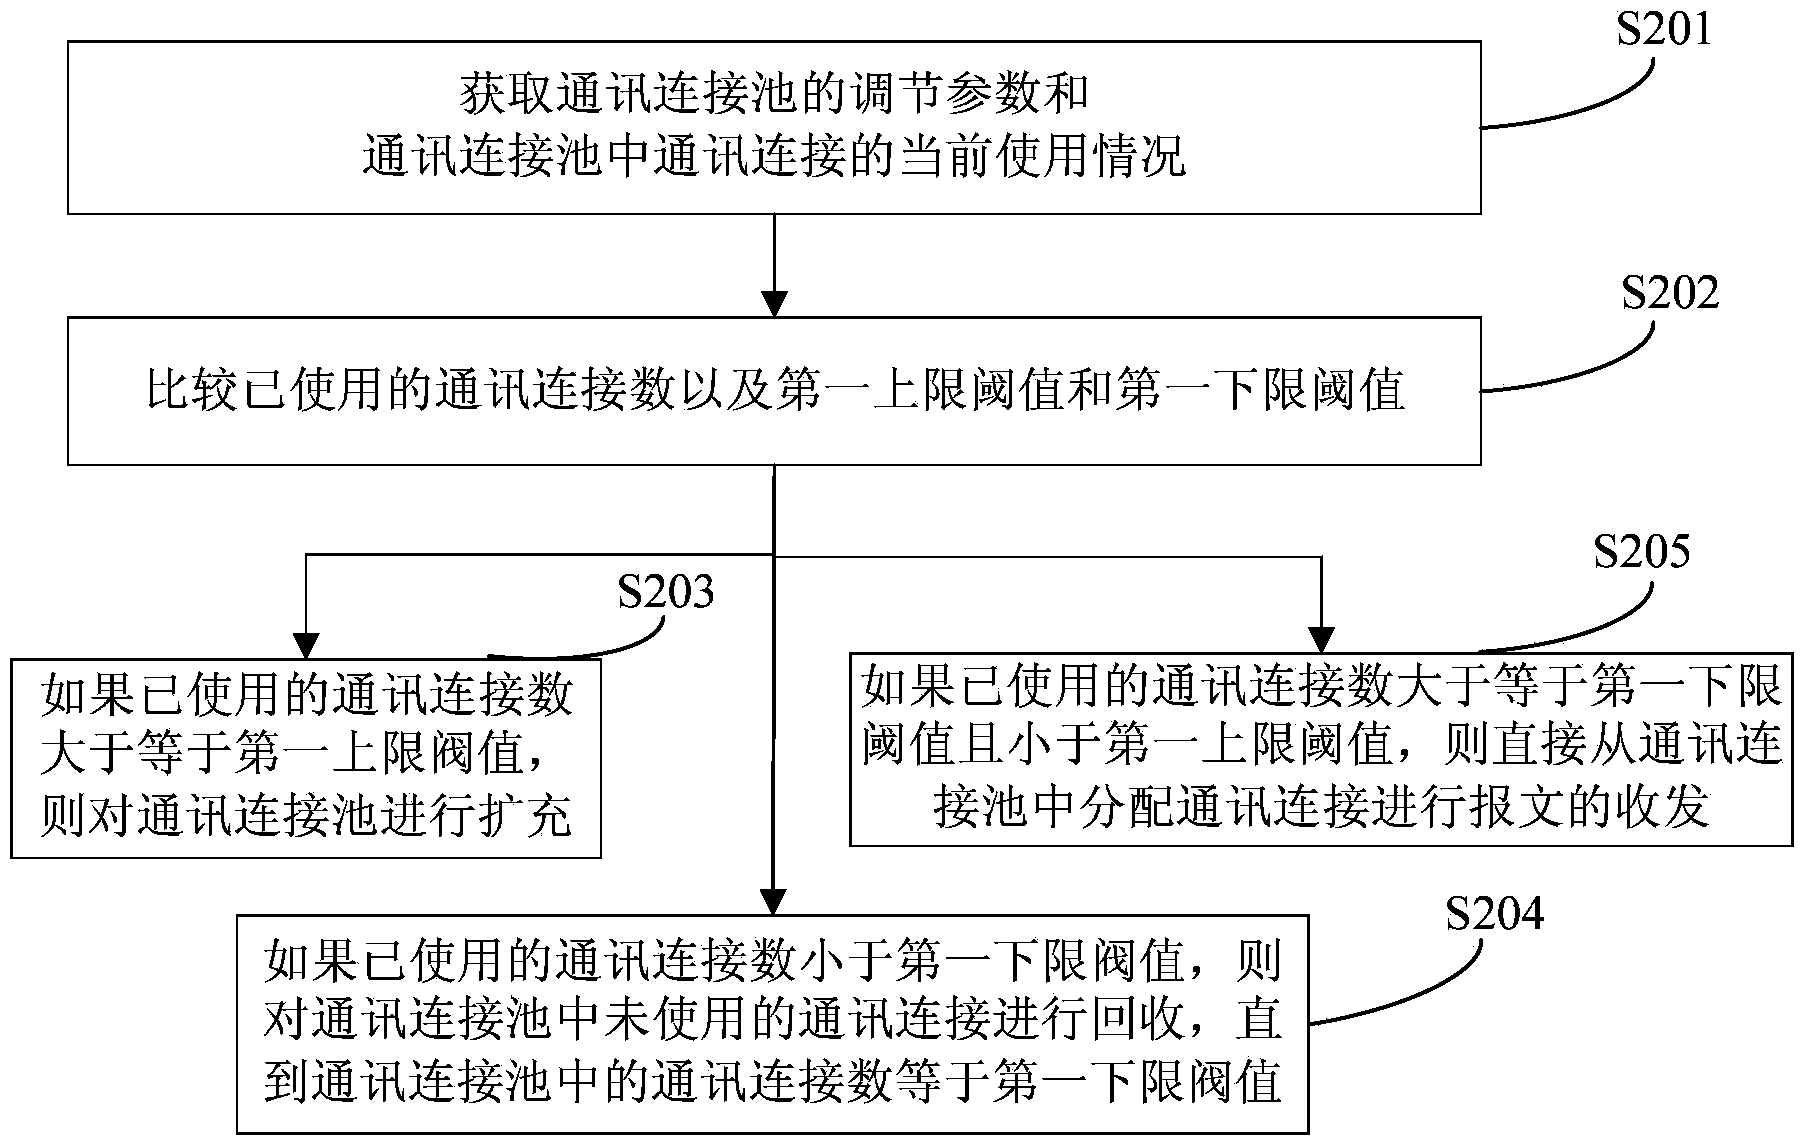 Message flow control method and system